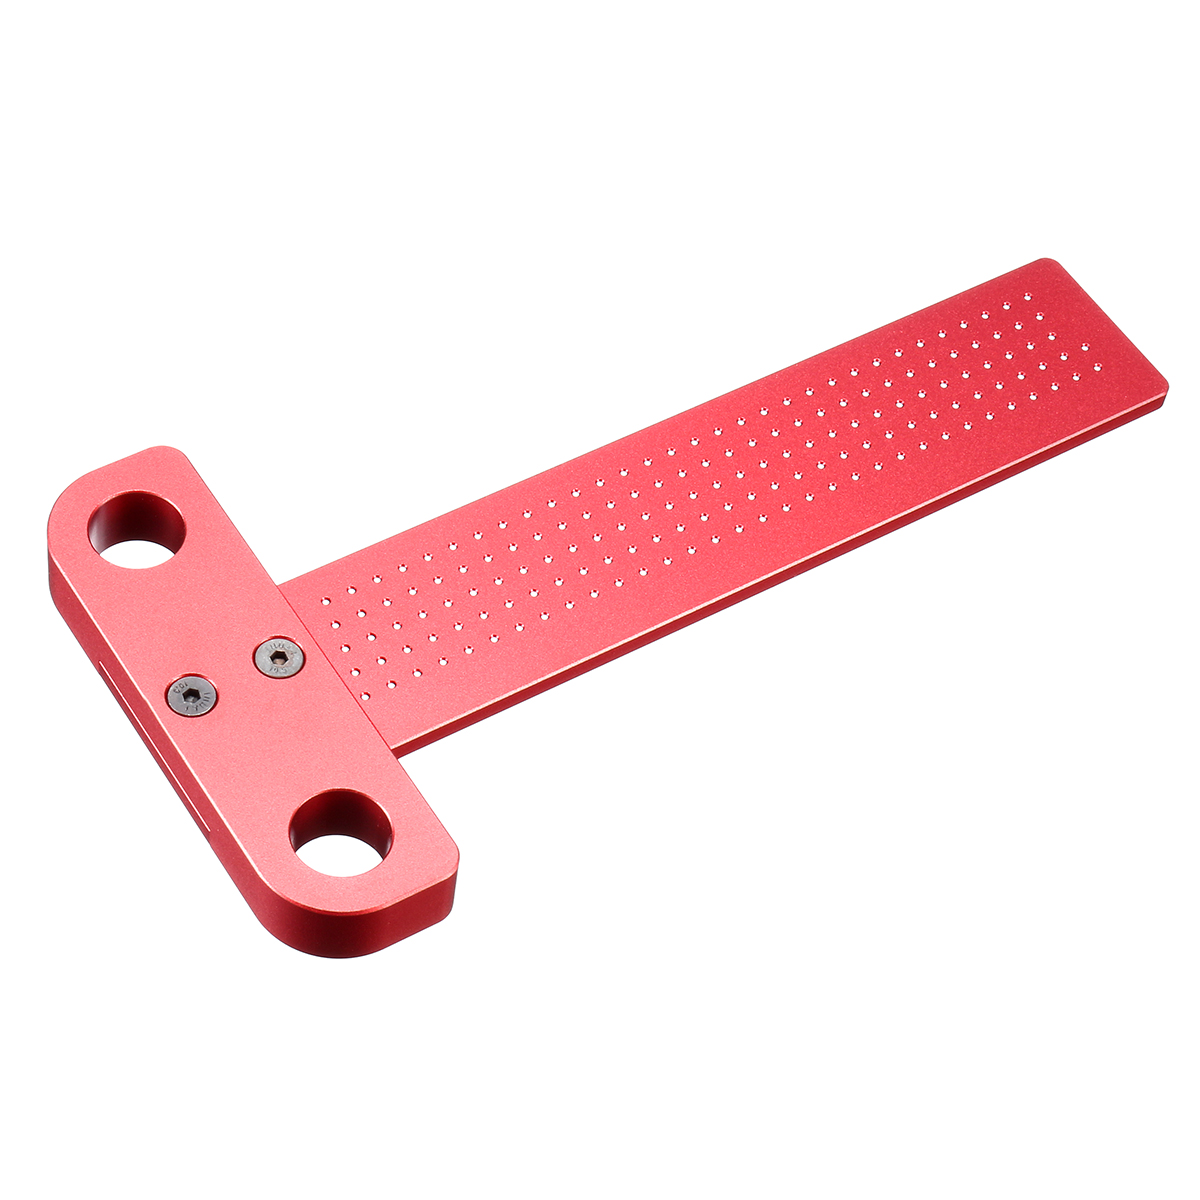 Drillpro-Aluminium-Alloy-T-160-Hole-Positioning-Metric-Measuring-Ruler-Woodworking-Precision-Marking-1324492-3